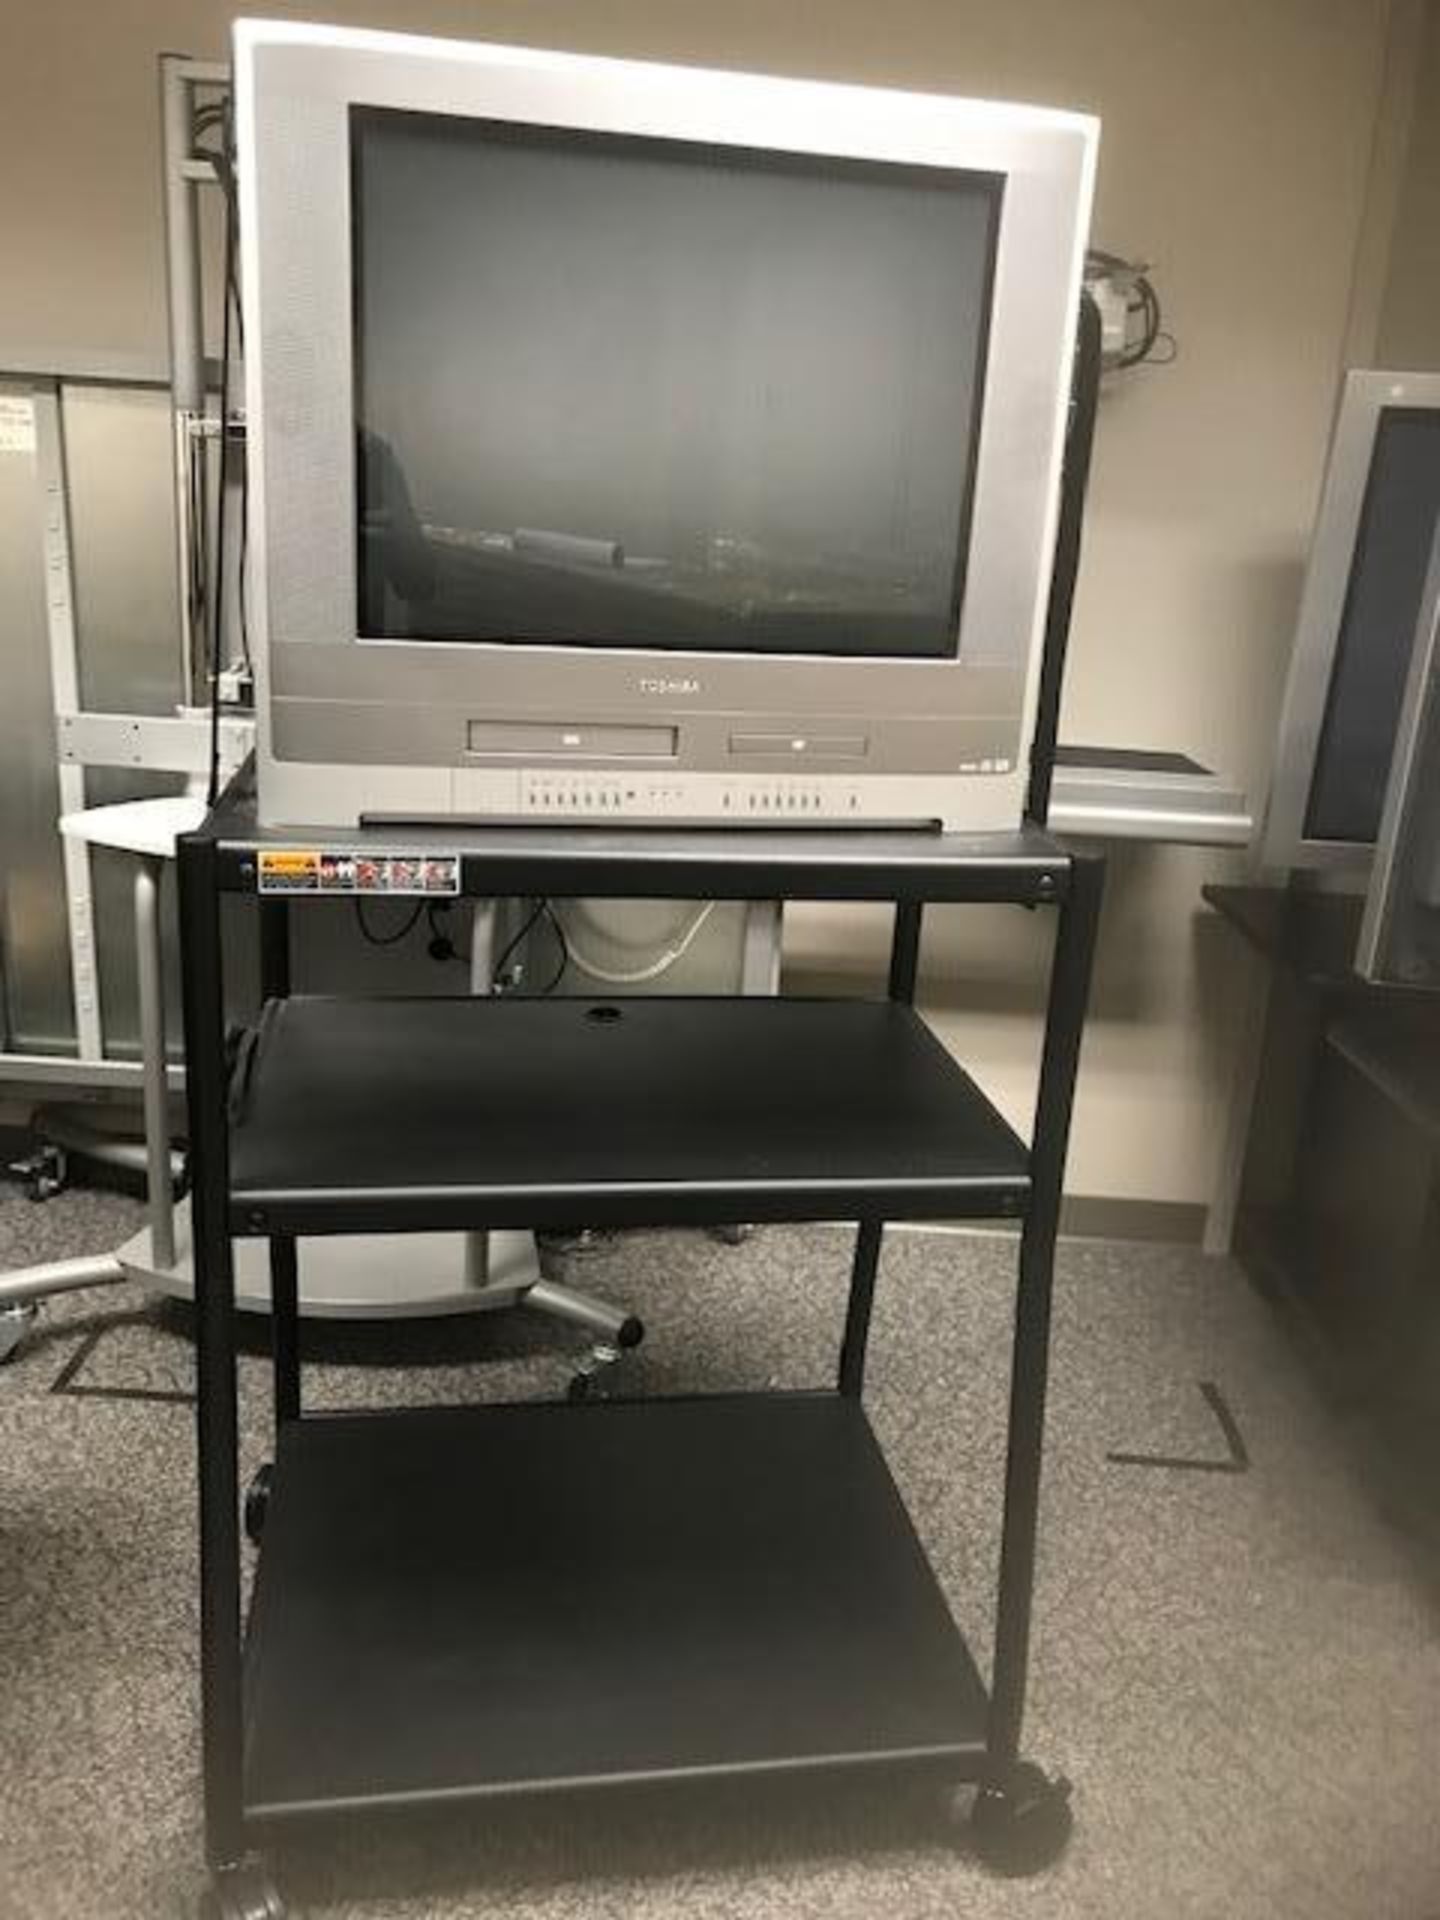 27" Toshiba TV with VHS/DVD and cart - no remote